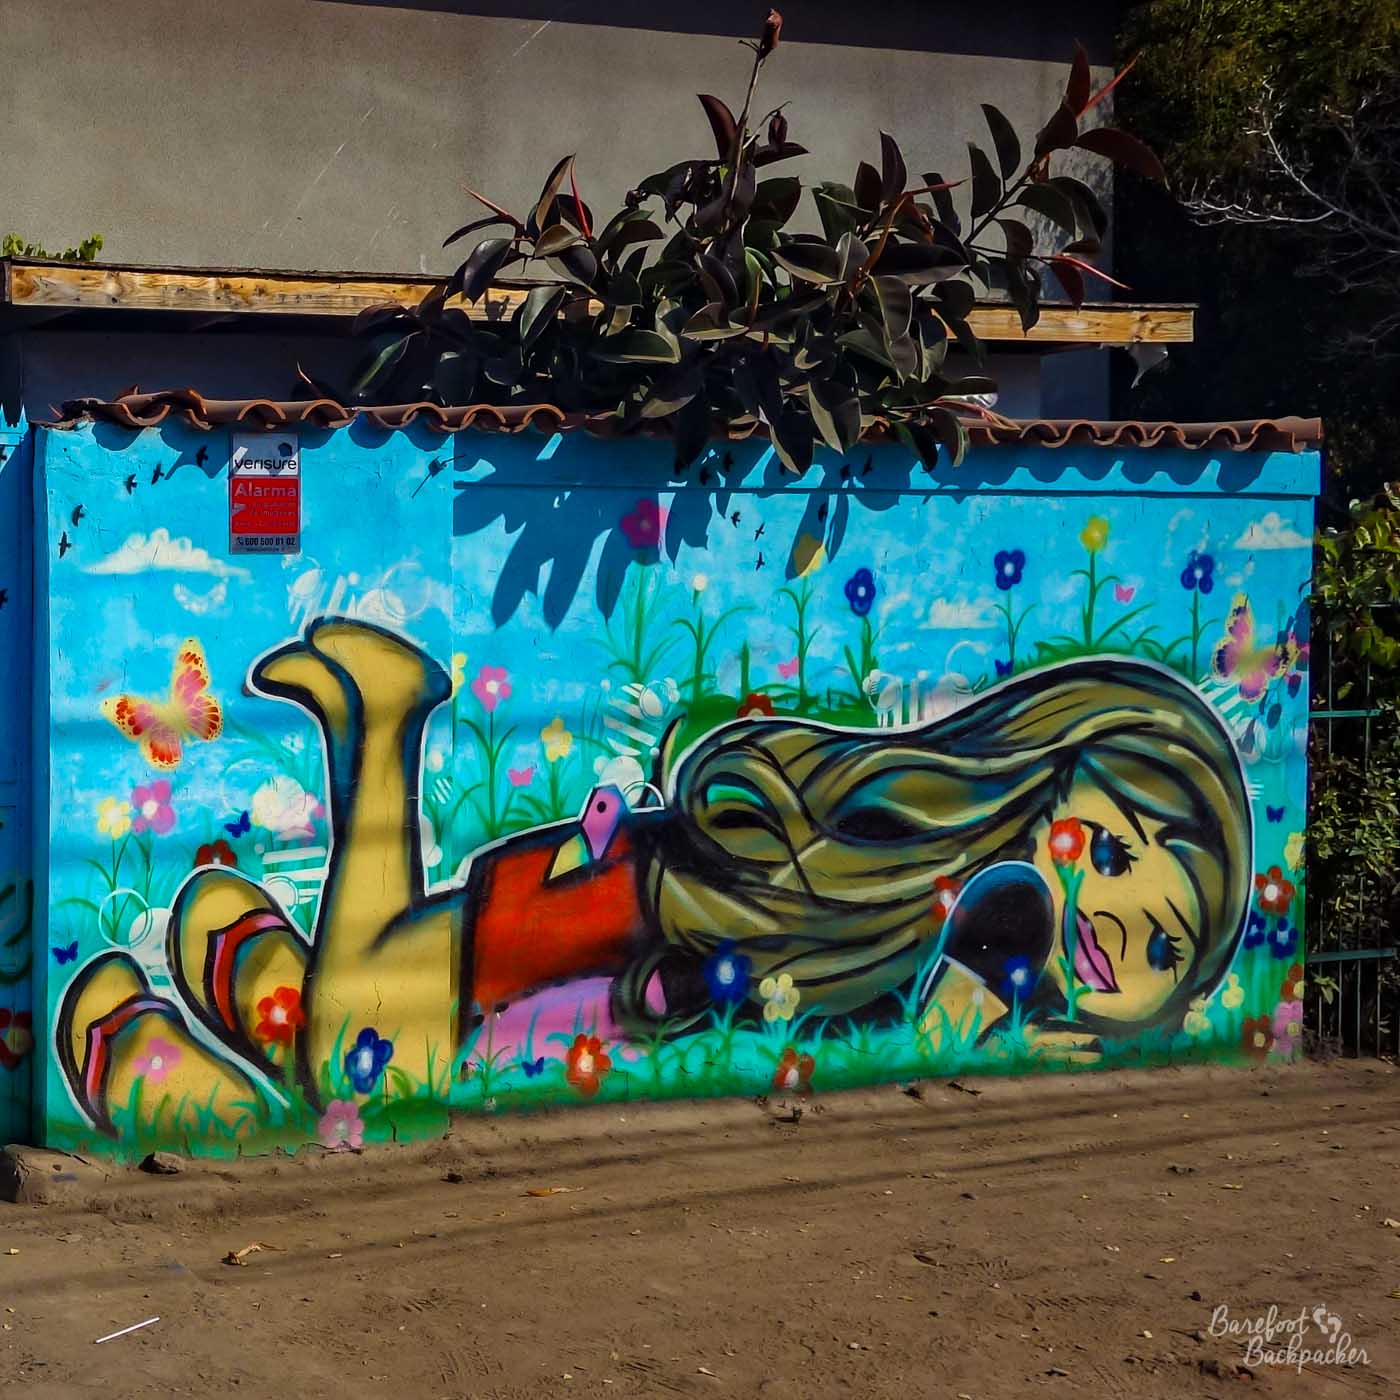 A piece of colourful street art on a wall. It's of a girl with long hair, lying in the flowers on her stomach, with her legs bent up in the air. Her sandals are on the grass behind her.